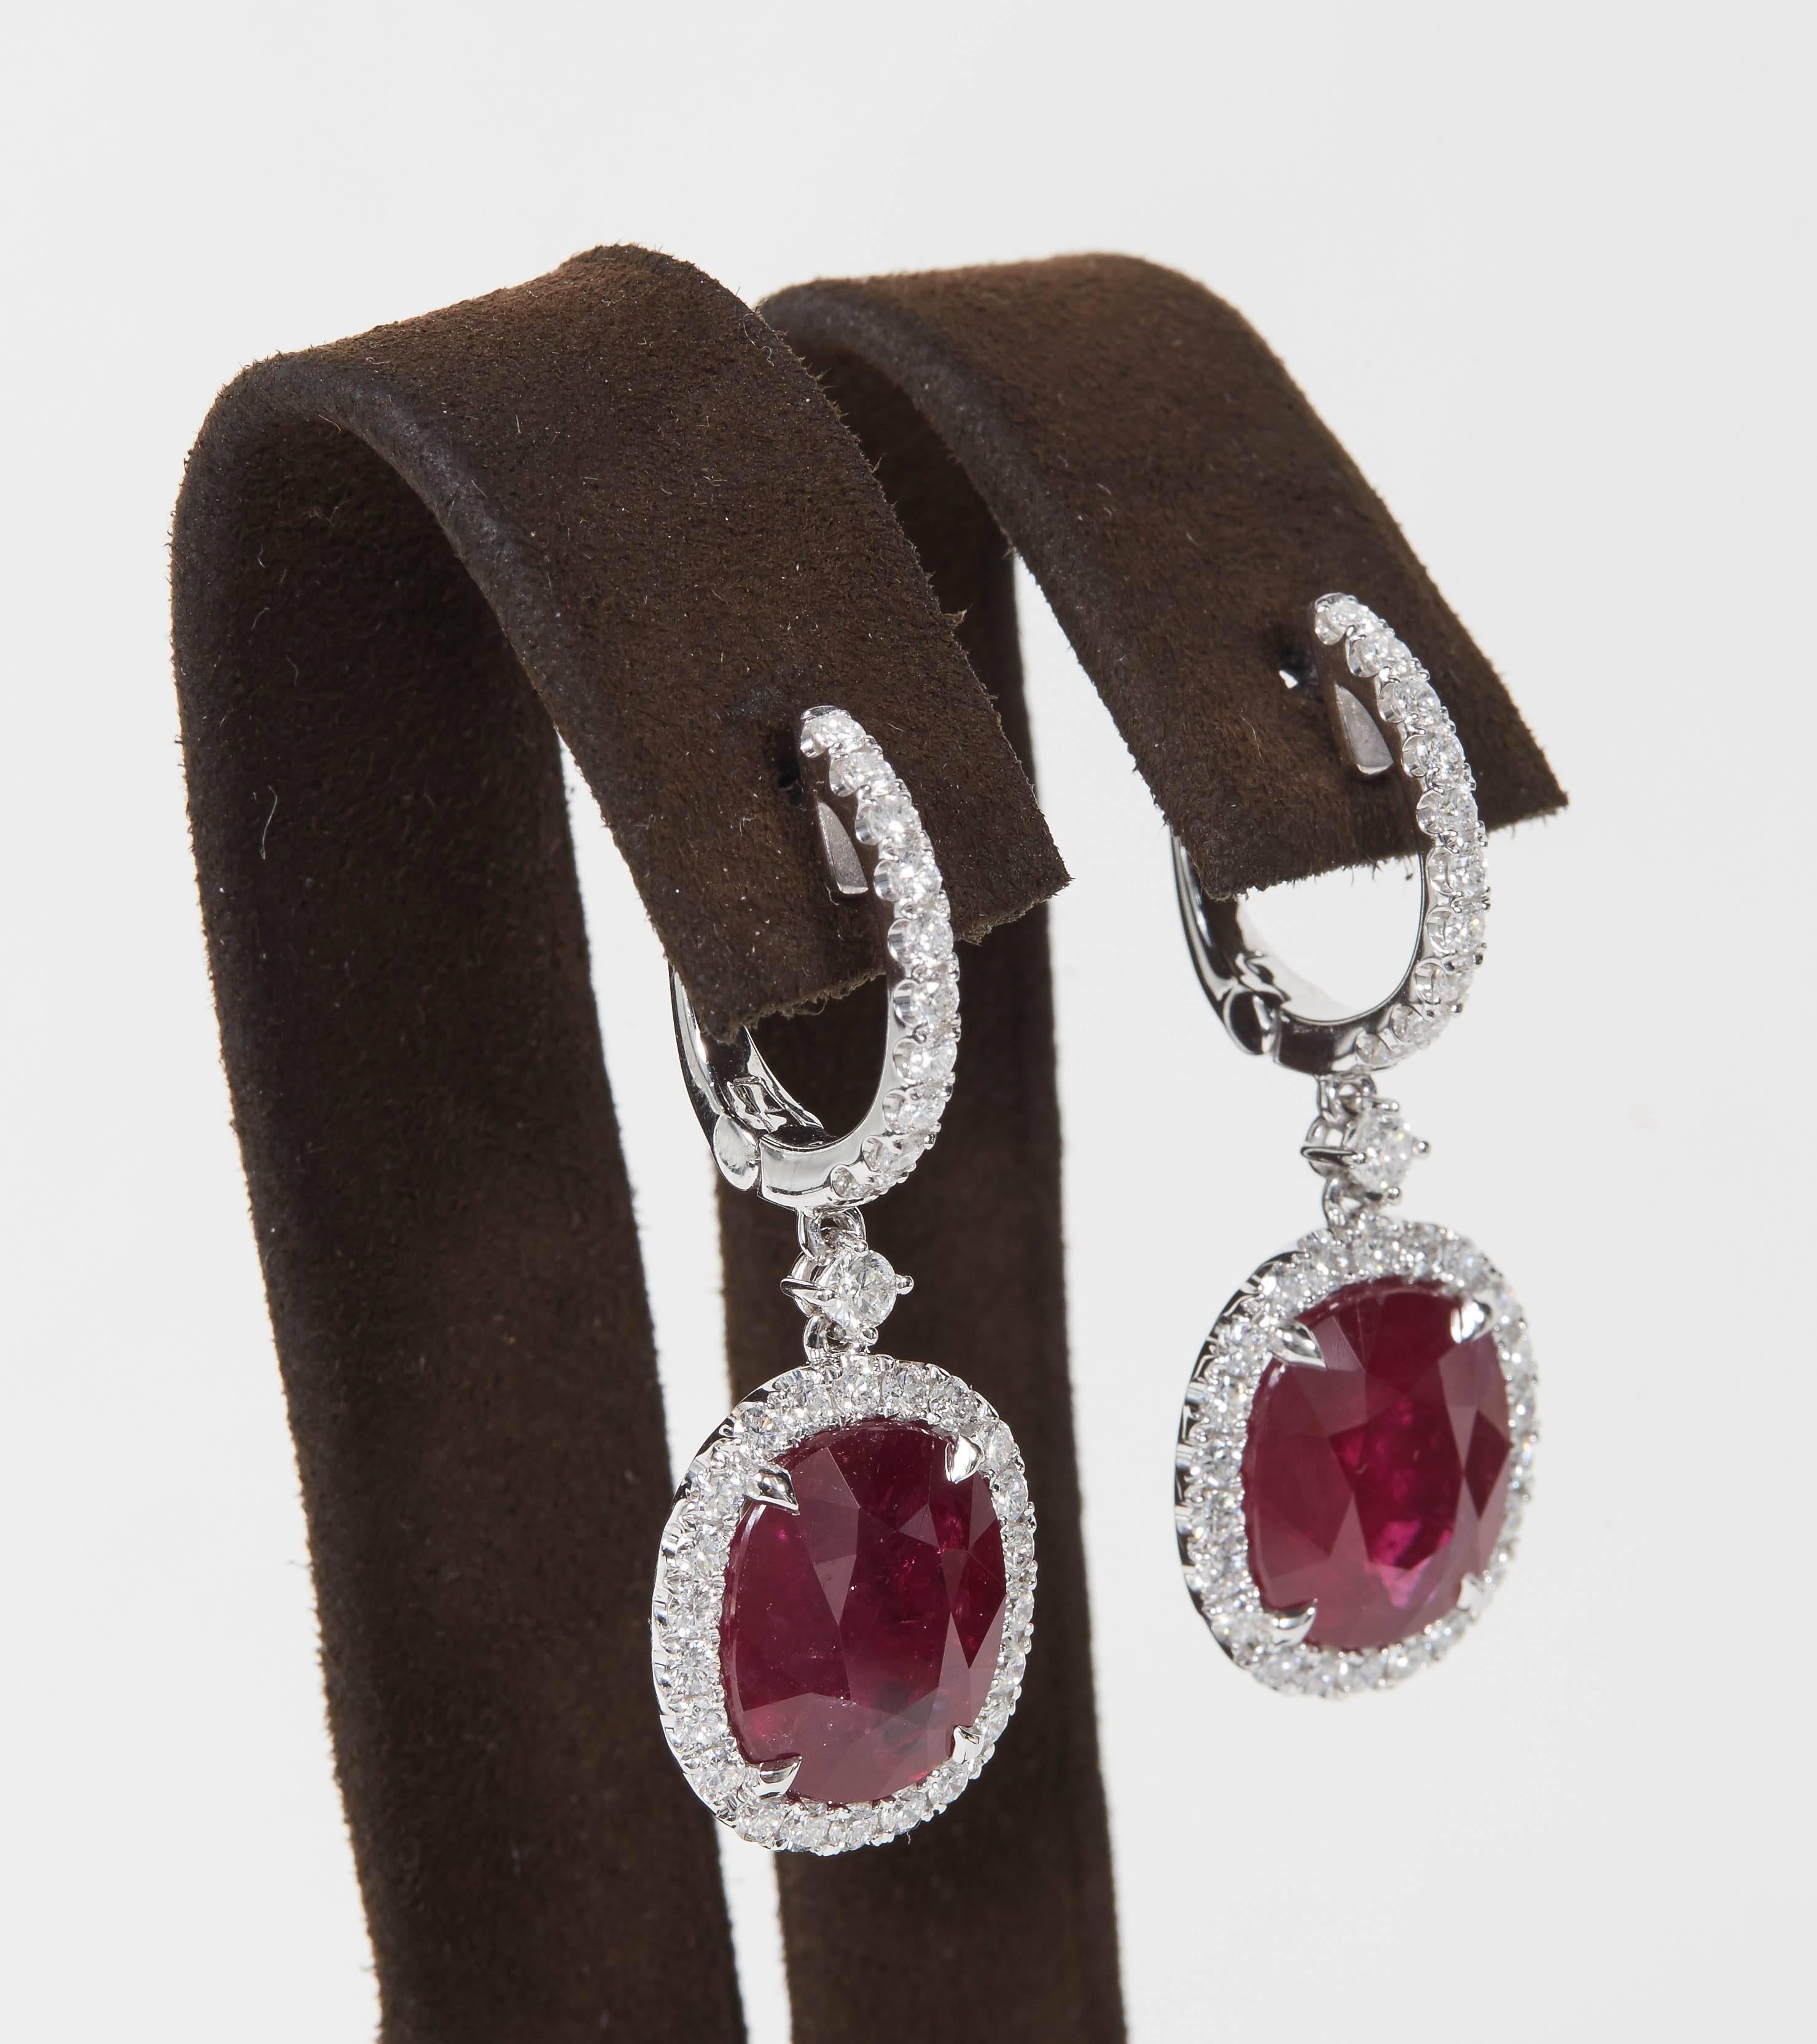 

A beautiful Ruby and Diamond earring set in a wearable design. 

13.70 carats of Fine Red Ruby (certified by GIA) set with 1.85 carats of round brilliant cut white diamonds. 

18k white gold.

Approximately 2 inches in length from the highest to